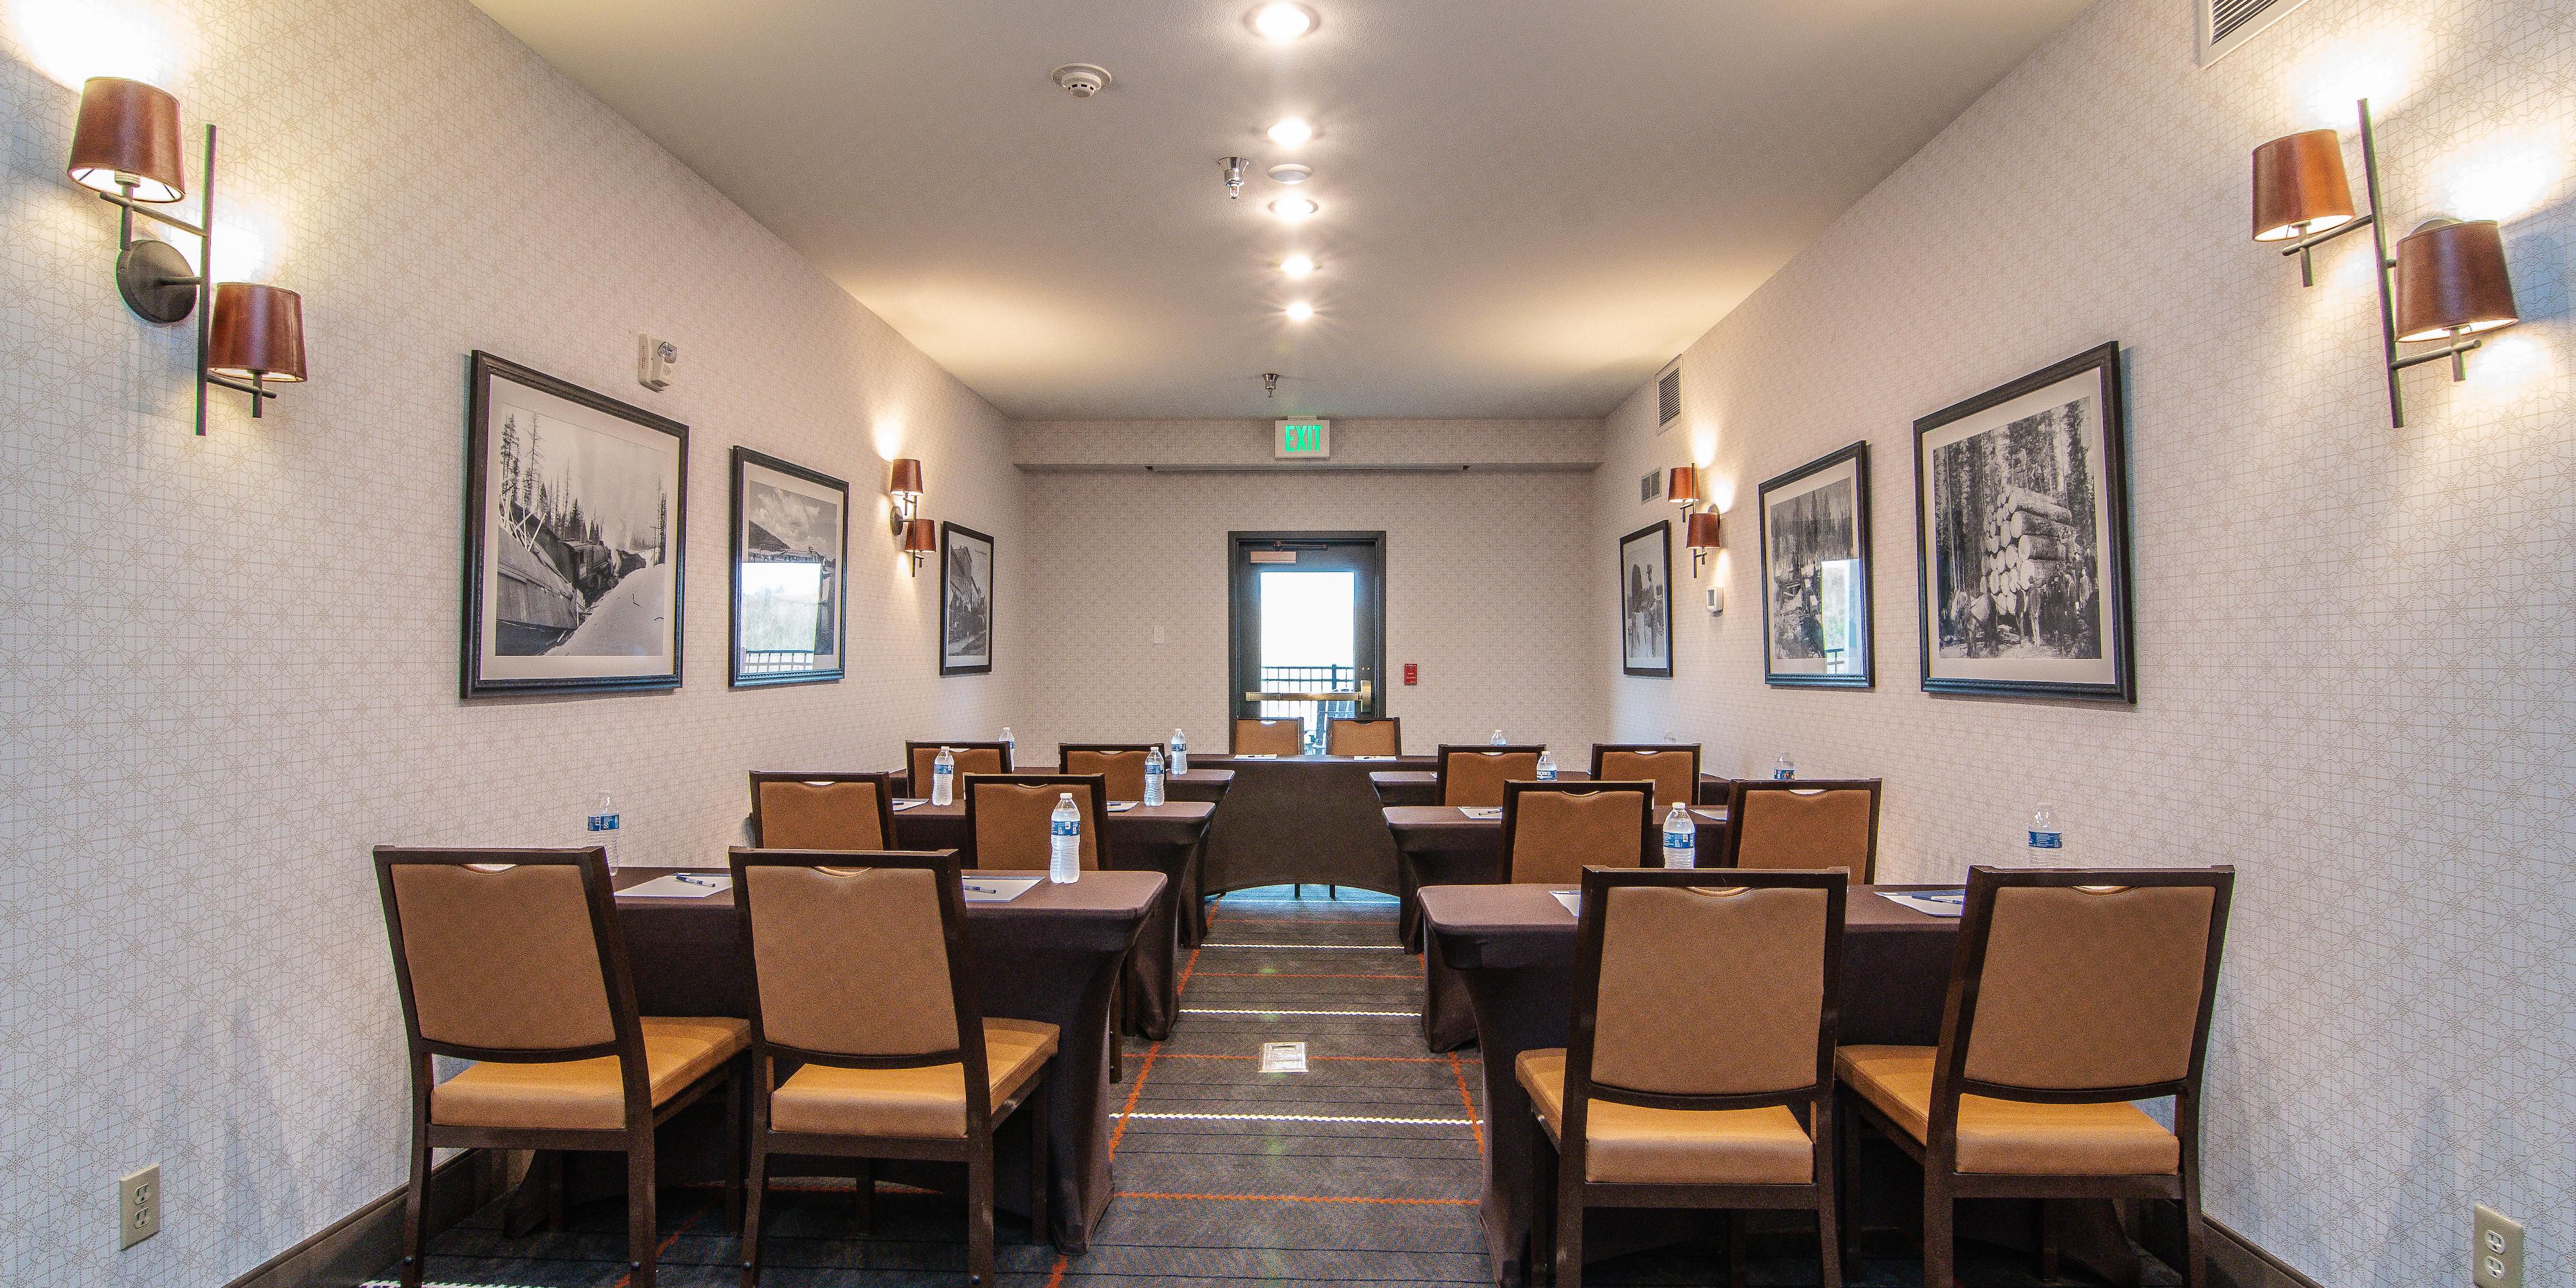 While lodging in Kalispell, up to 24 business travelers can utilize our meeting room, a 336-foot space that comes with free wireless Internet access. Enjoy some fresh baked cookies and infused water during your meeting.  